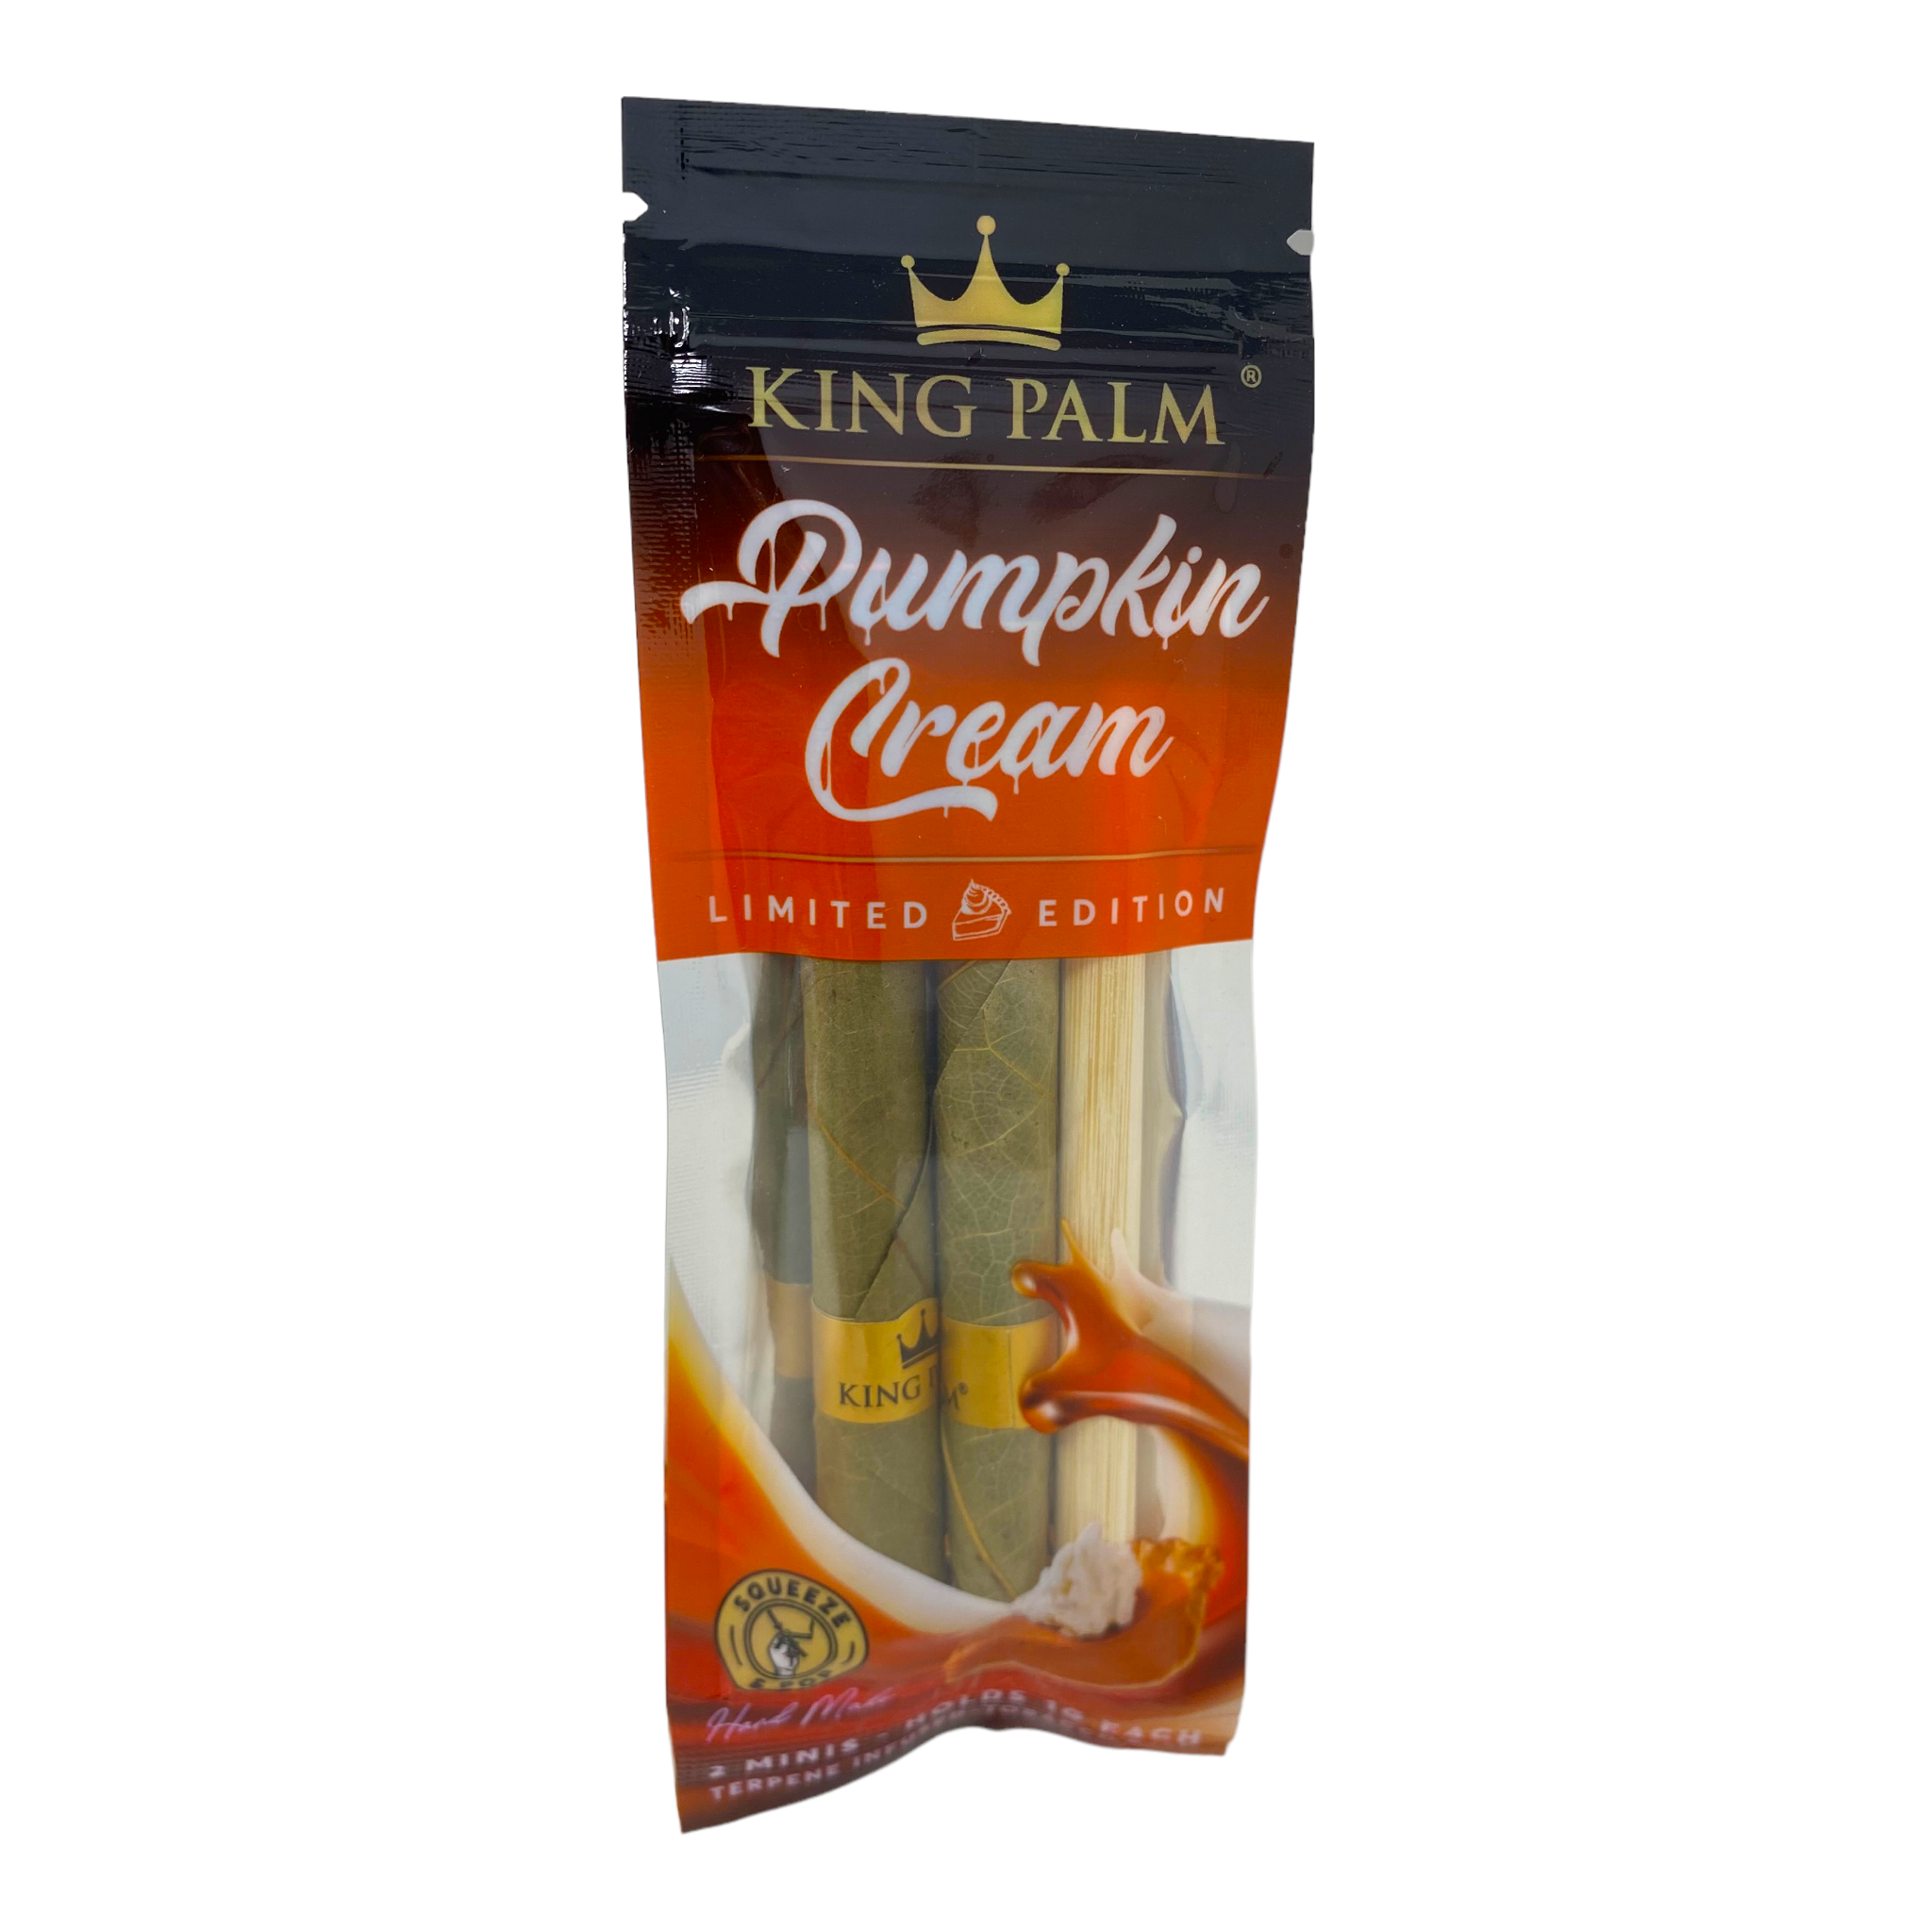 King Palm Flavored Pre-Rolls